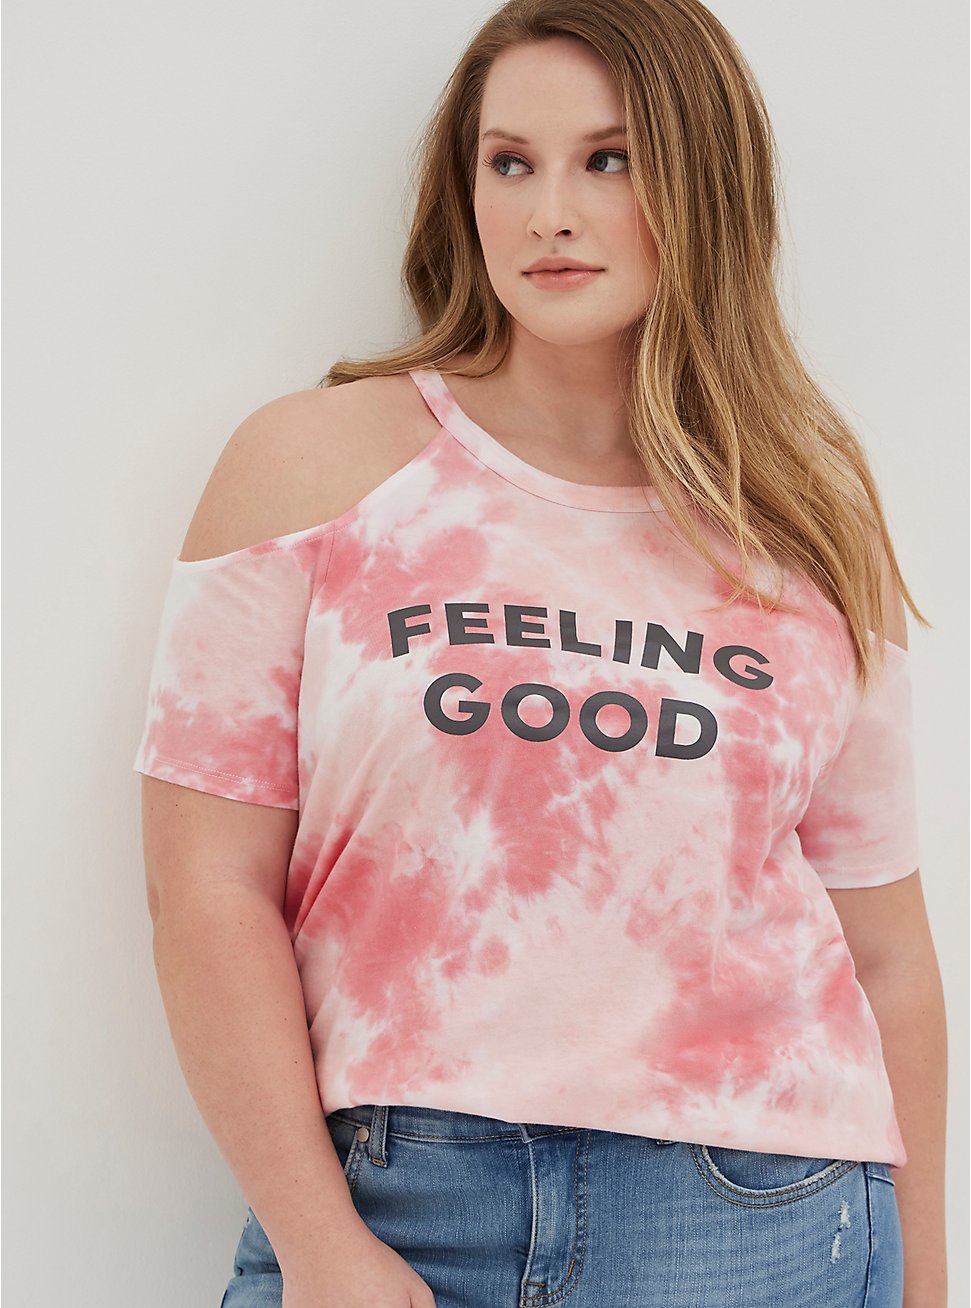 Graphic Classic Fit Cotton Cold Shoulder Top, FEELING GOOD PINK DYE, hi-res